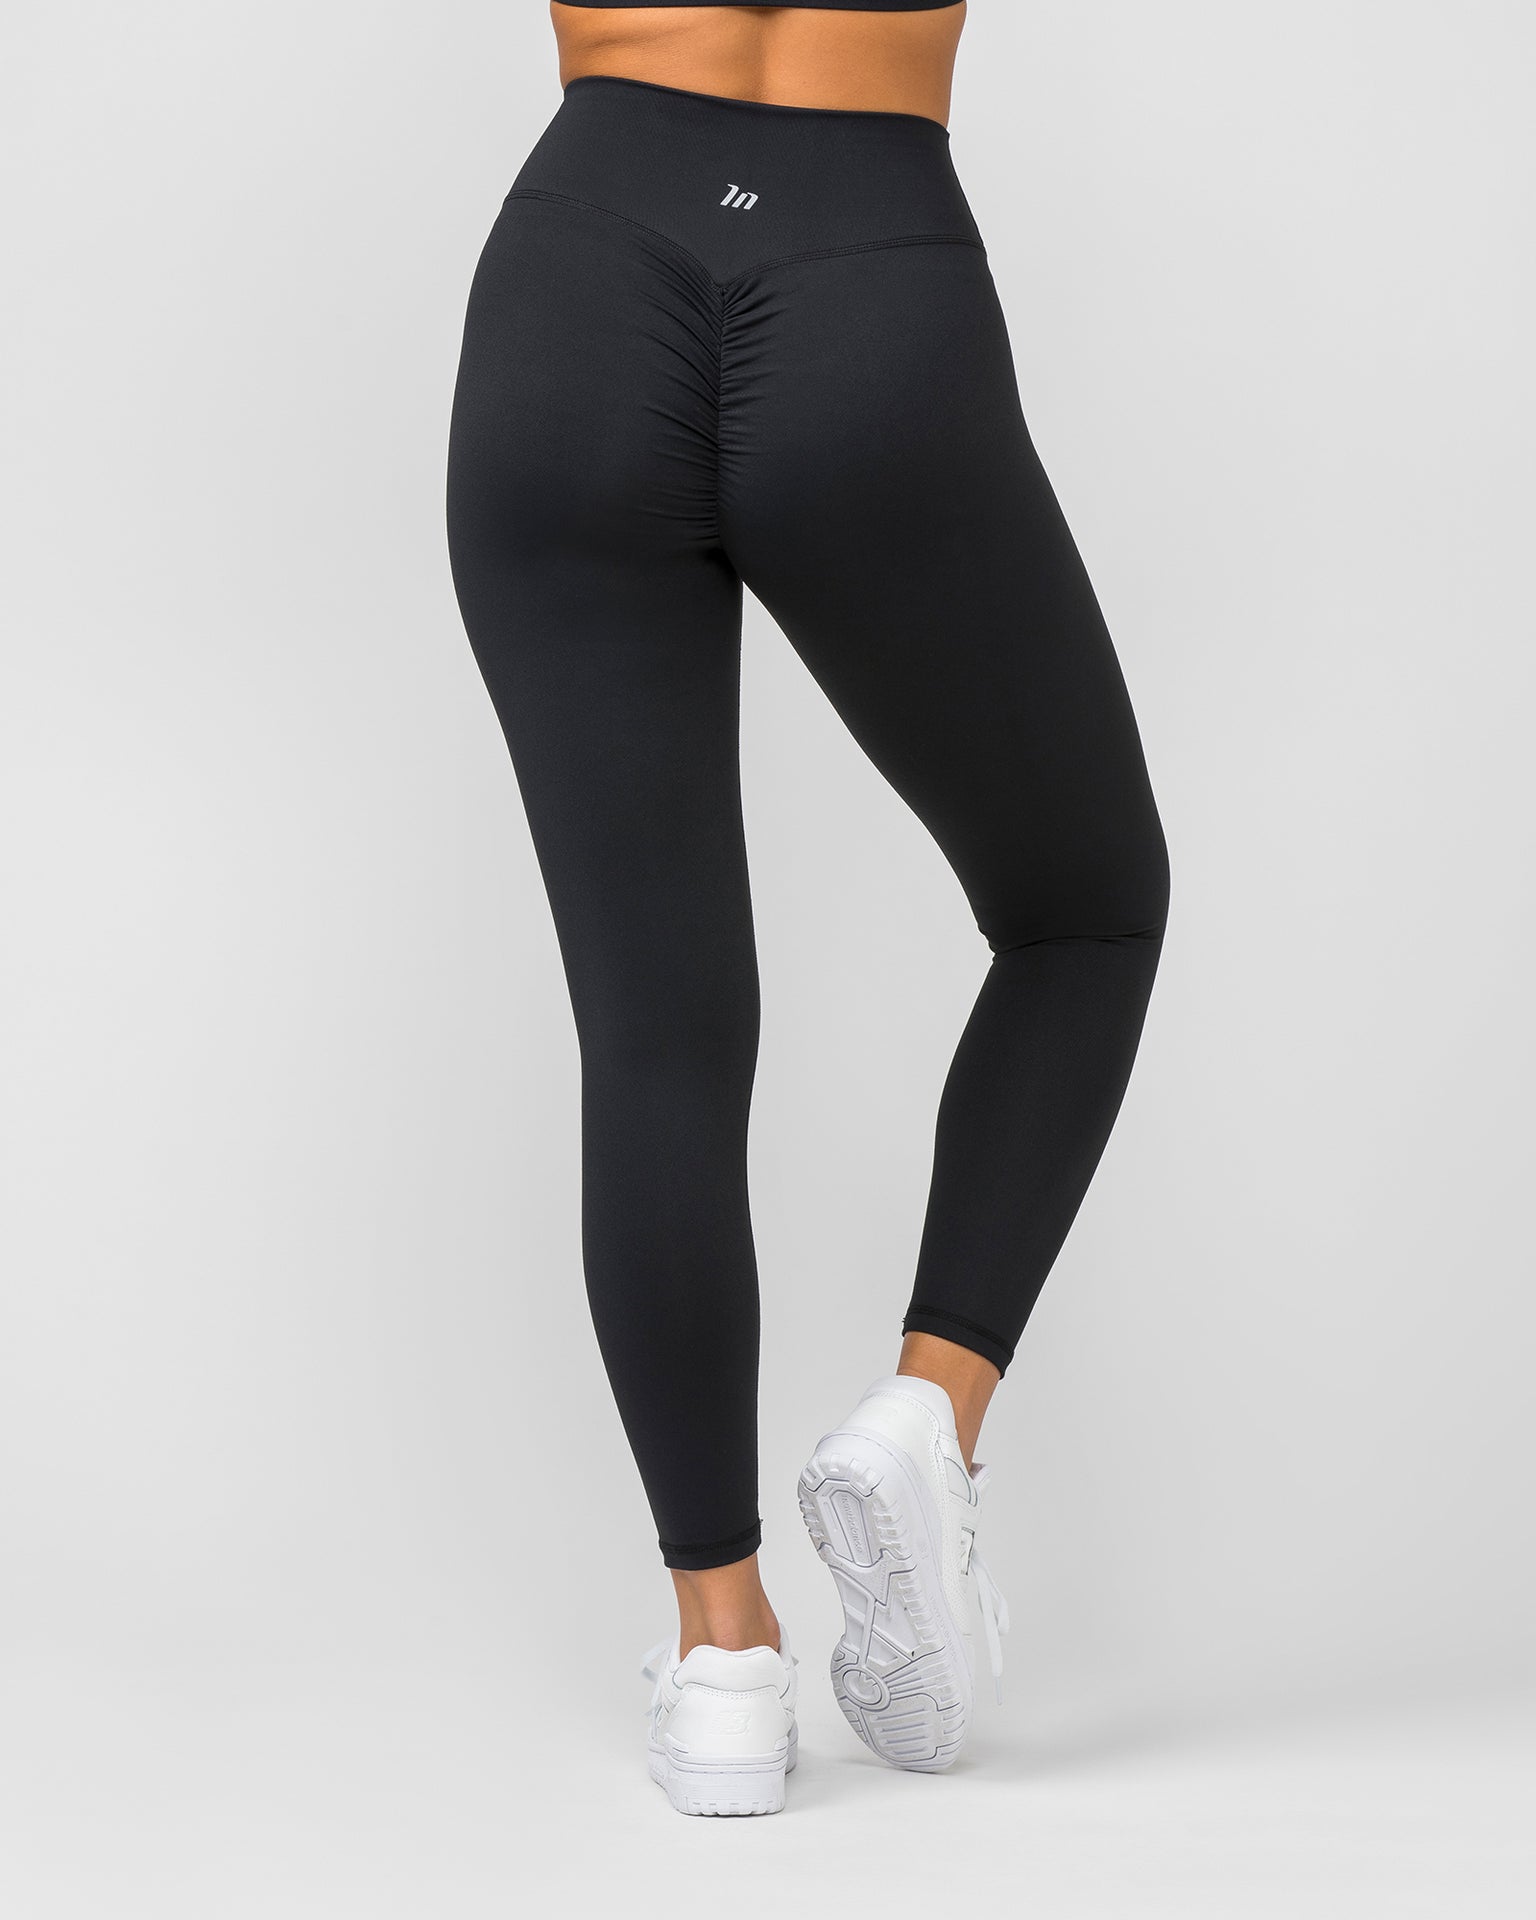 Gaiam black full length leggings women's size XS, ruched ankle